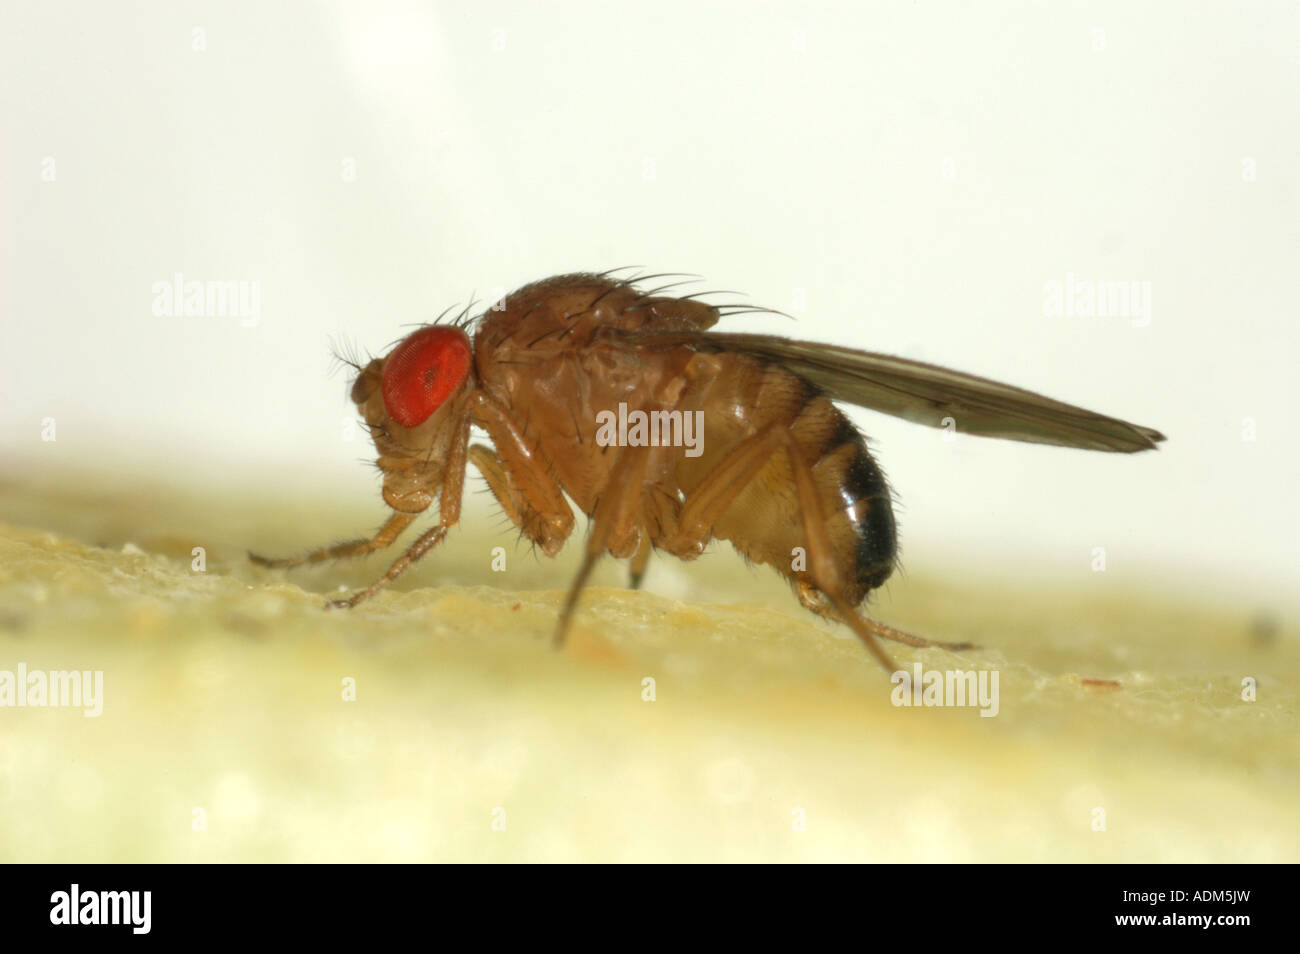 Adult fruit fly Drosophila melanogaster a genus used for experiments because of their rapid breeding cycle Stock Photo